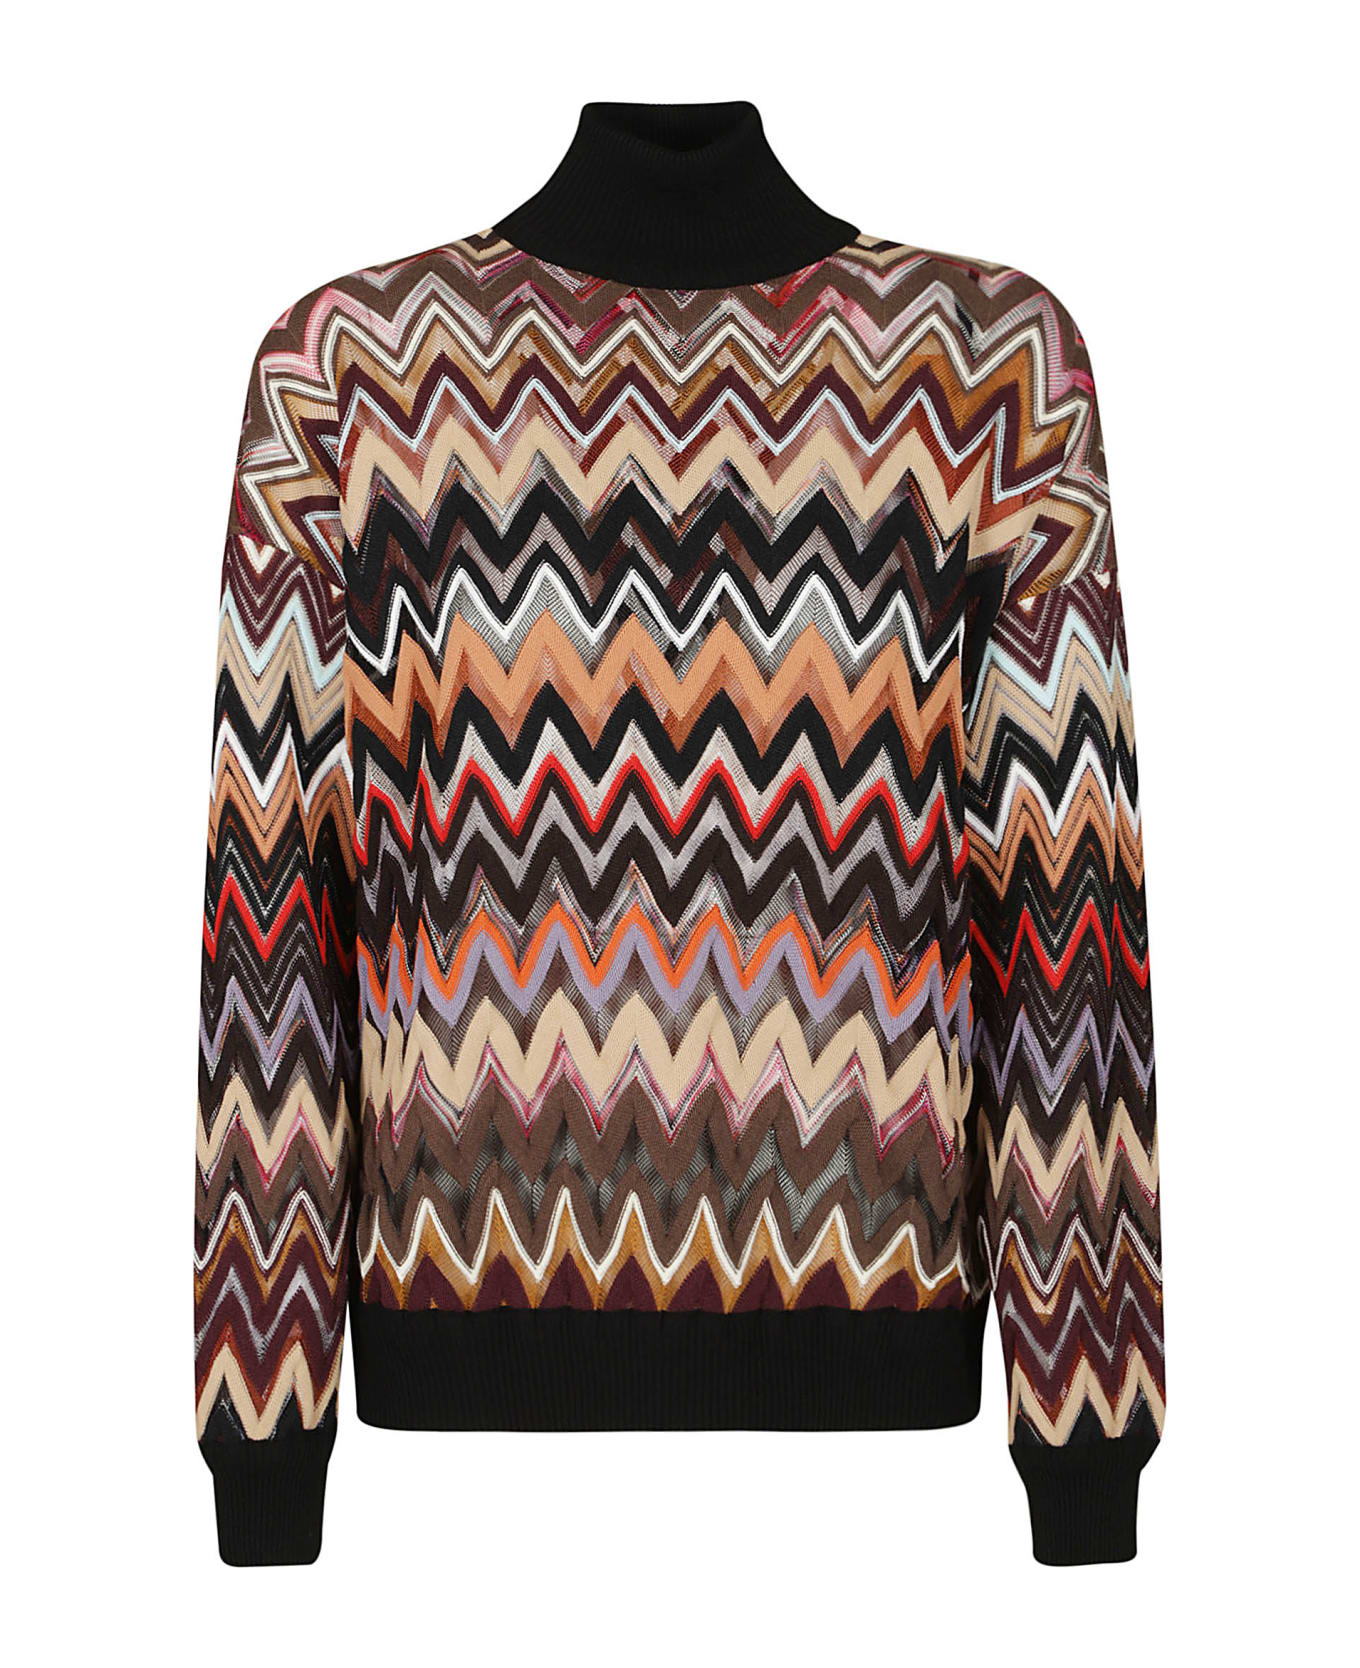 Missoni High-neck Zig-zag Patterned Sweater - Multicolor